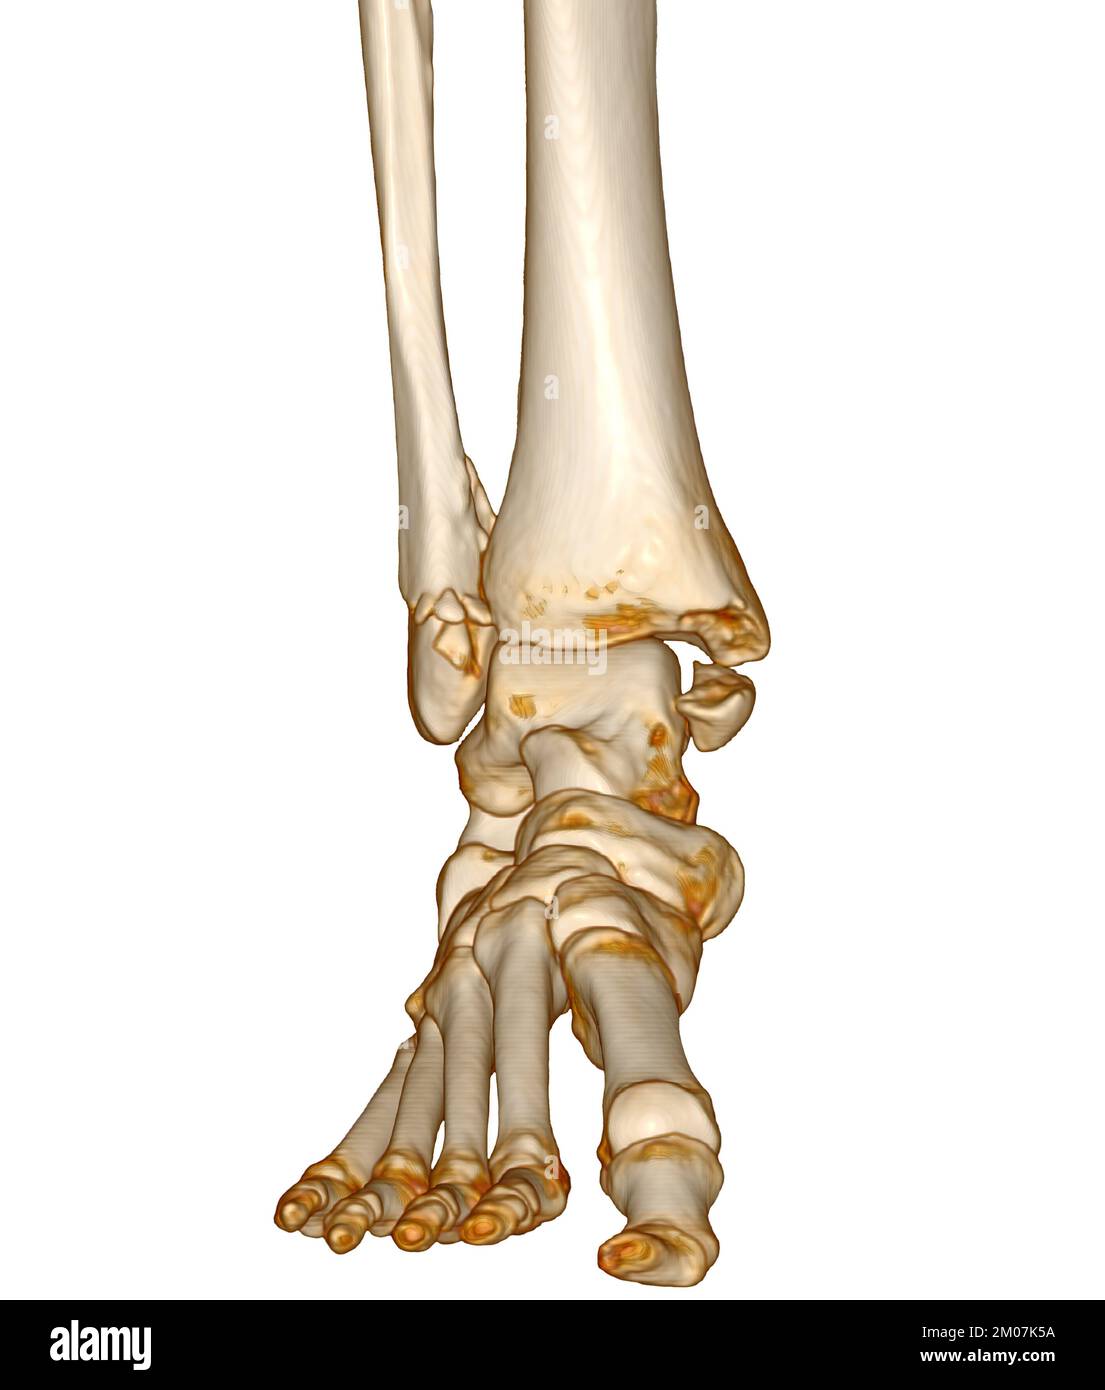 28,955 Ankle Joint Images, Stock Photos, 3D objects, & Vectors